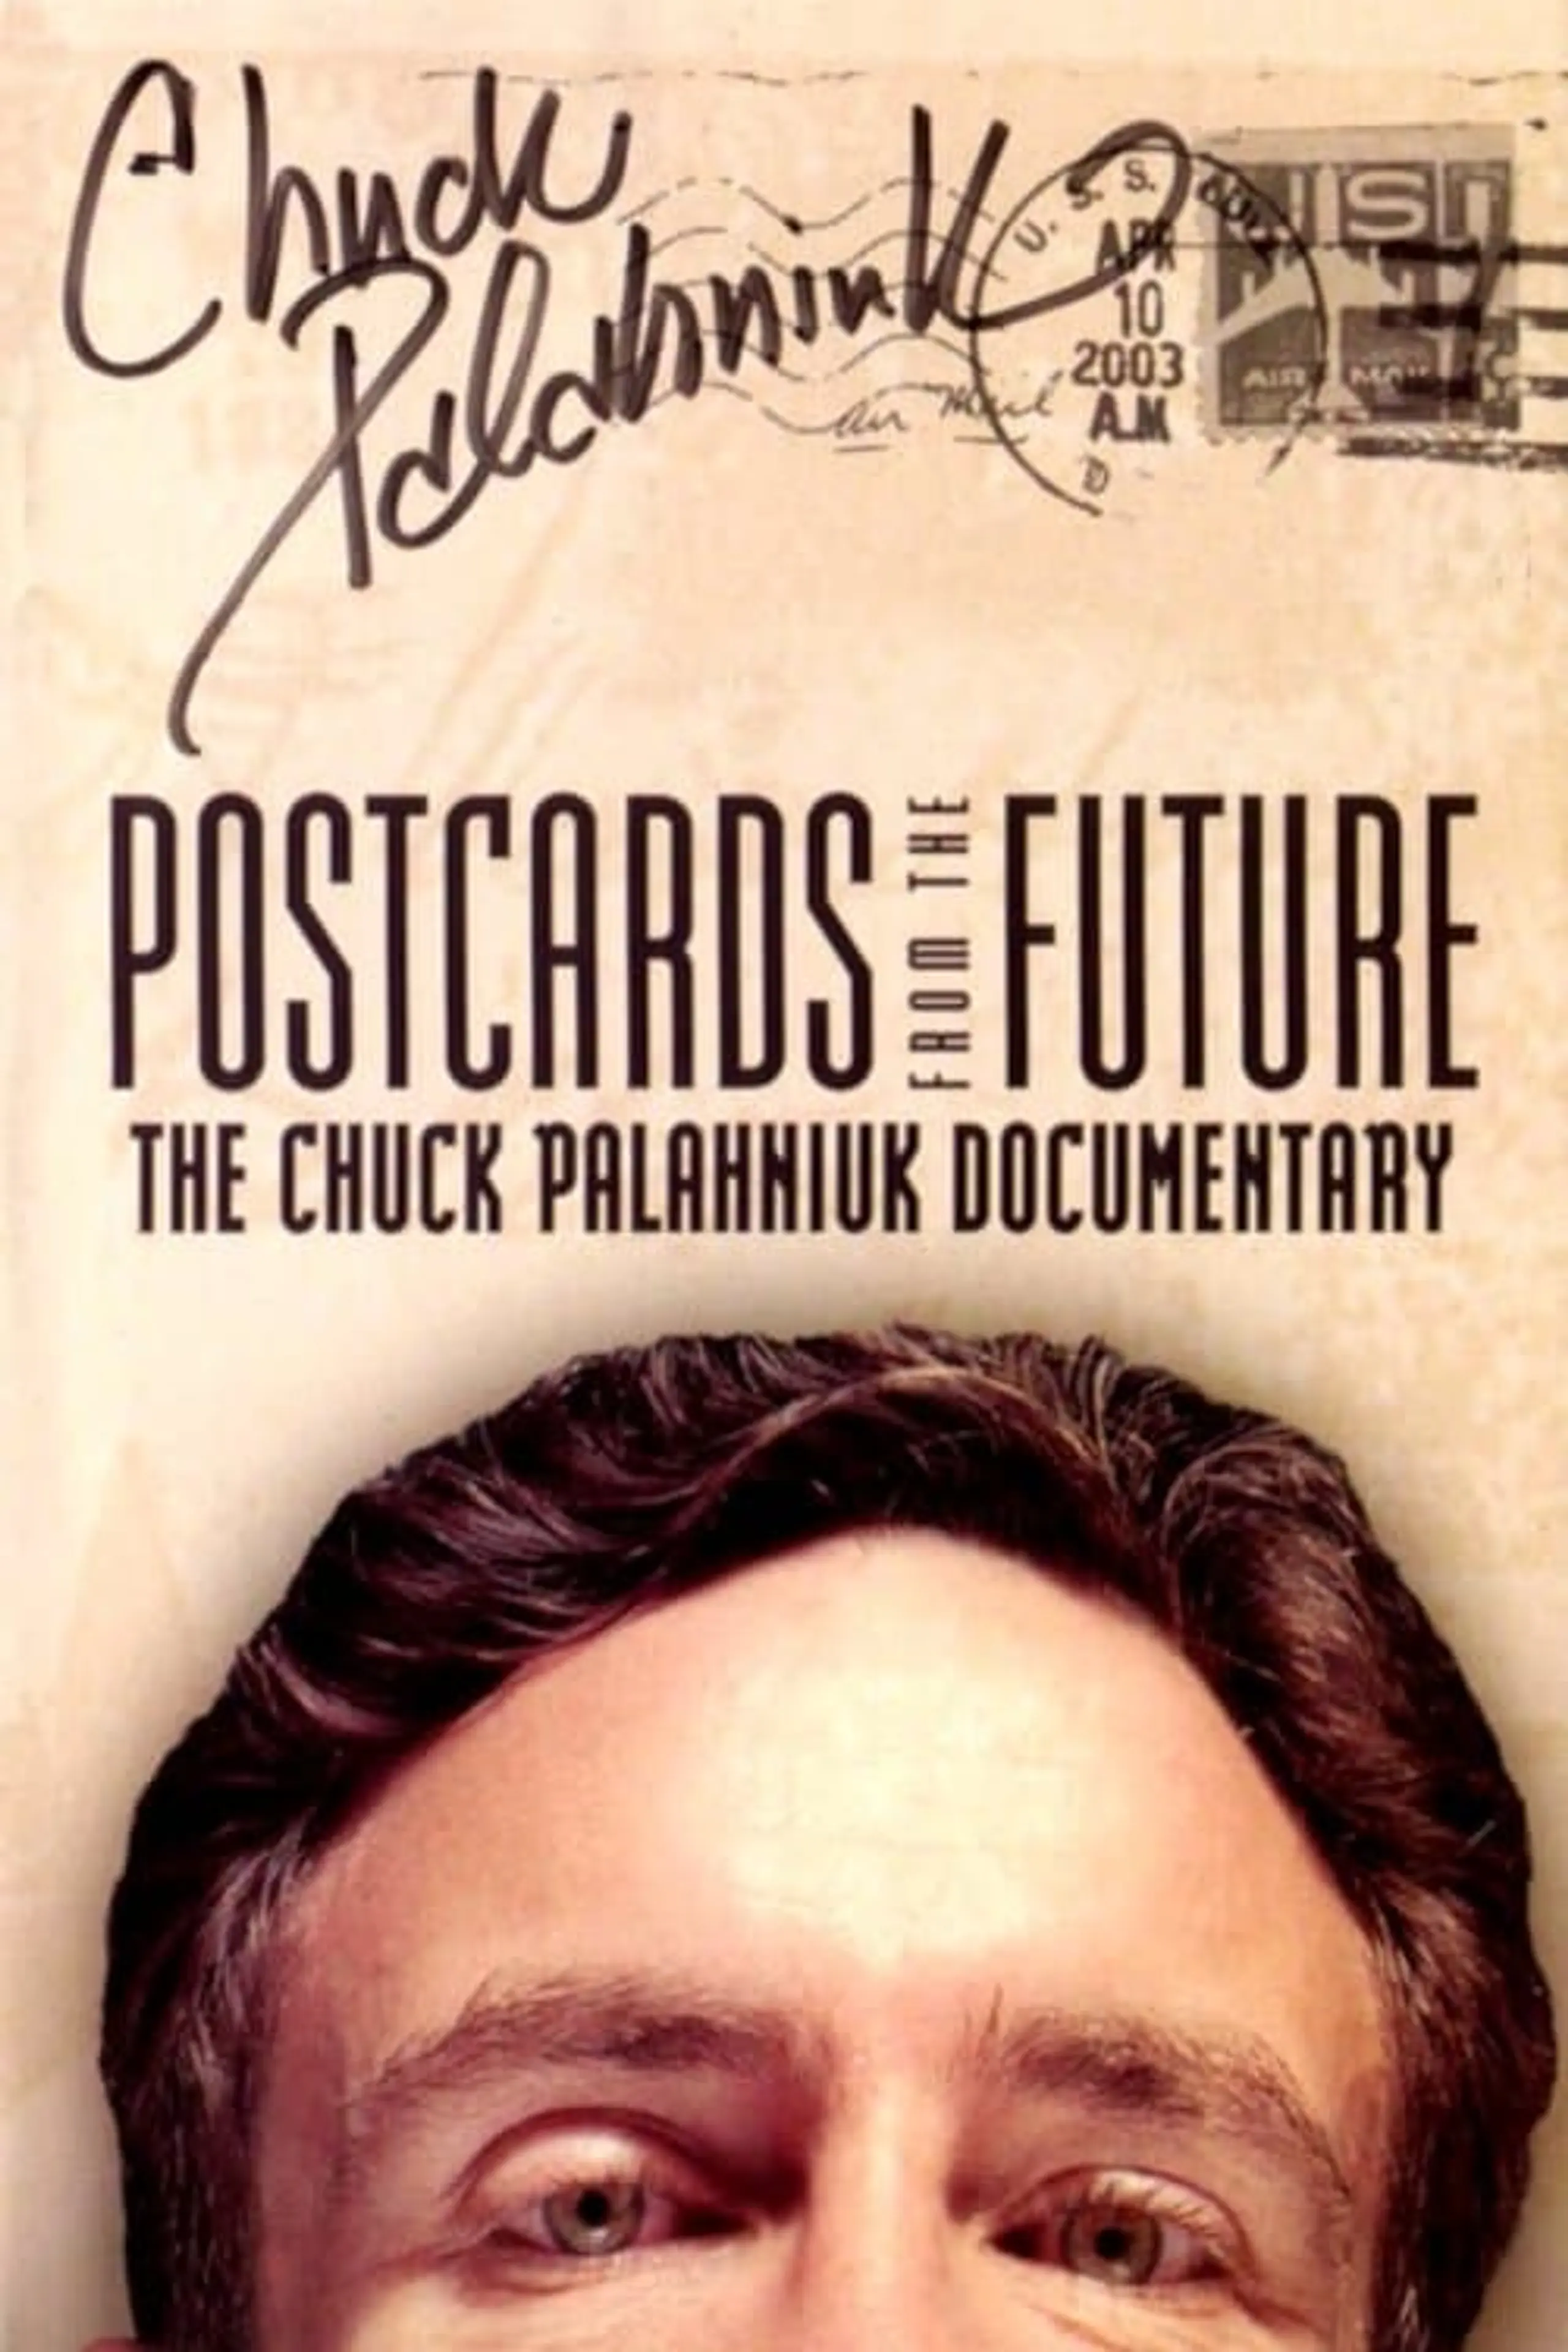 Postcards from the Future: The Chuck Palahniuk Documentary